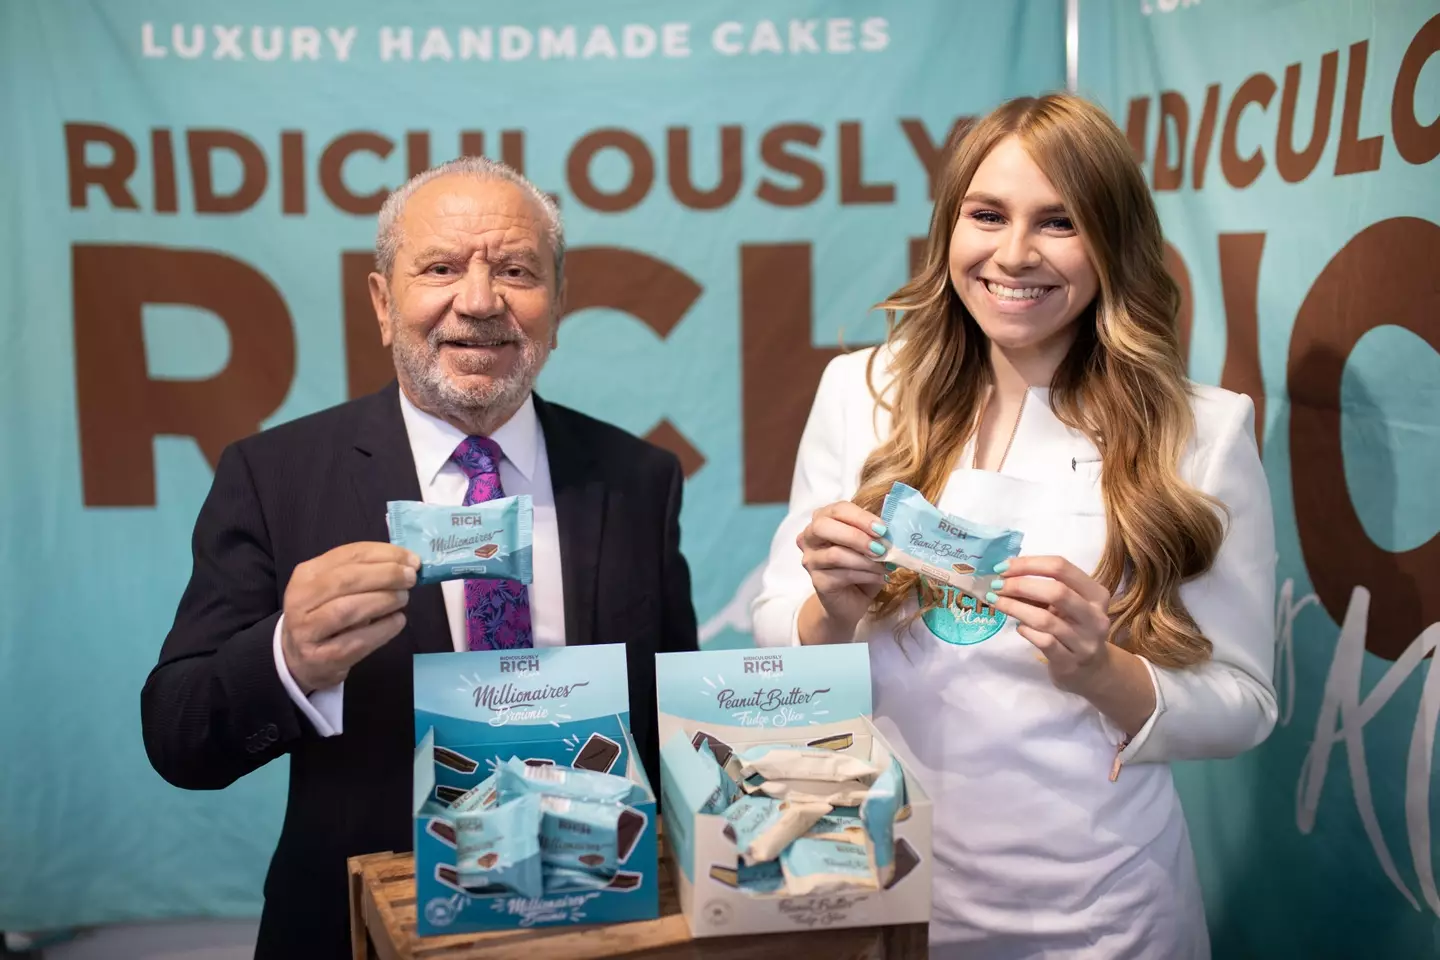 Alana Spencer is now flying solo with her cake business.